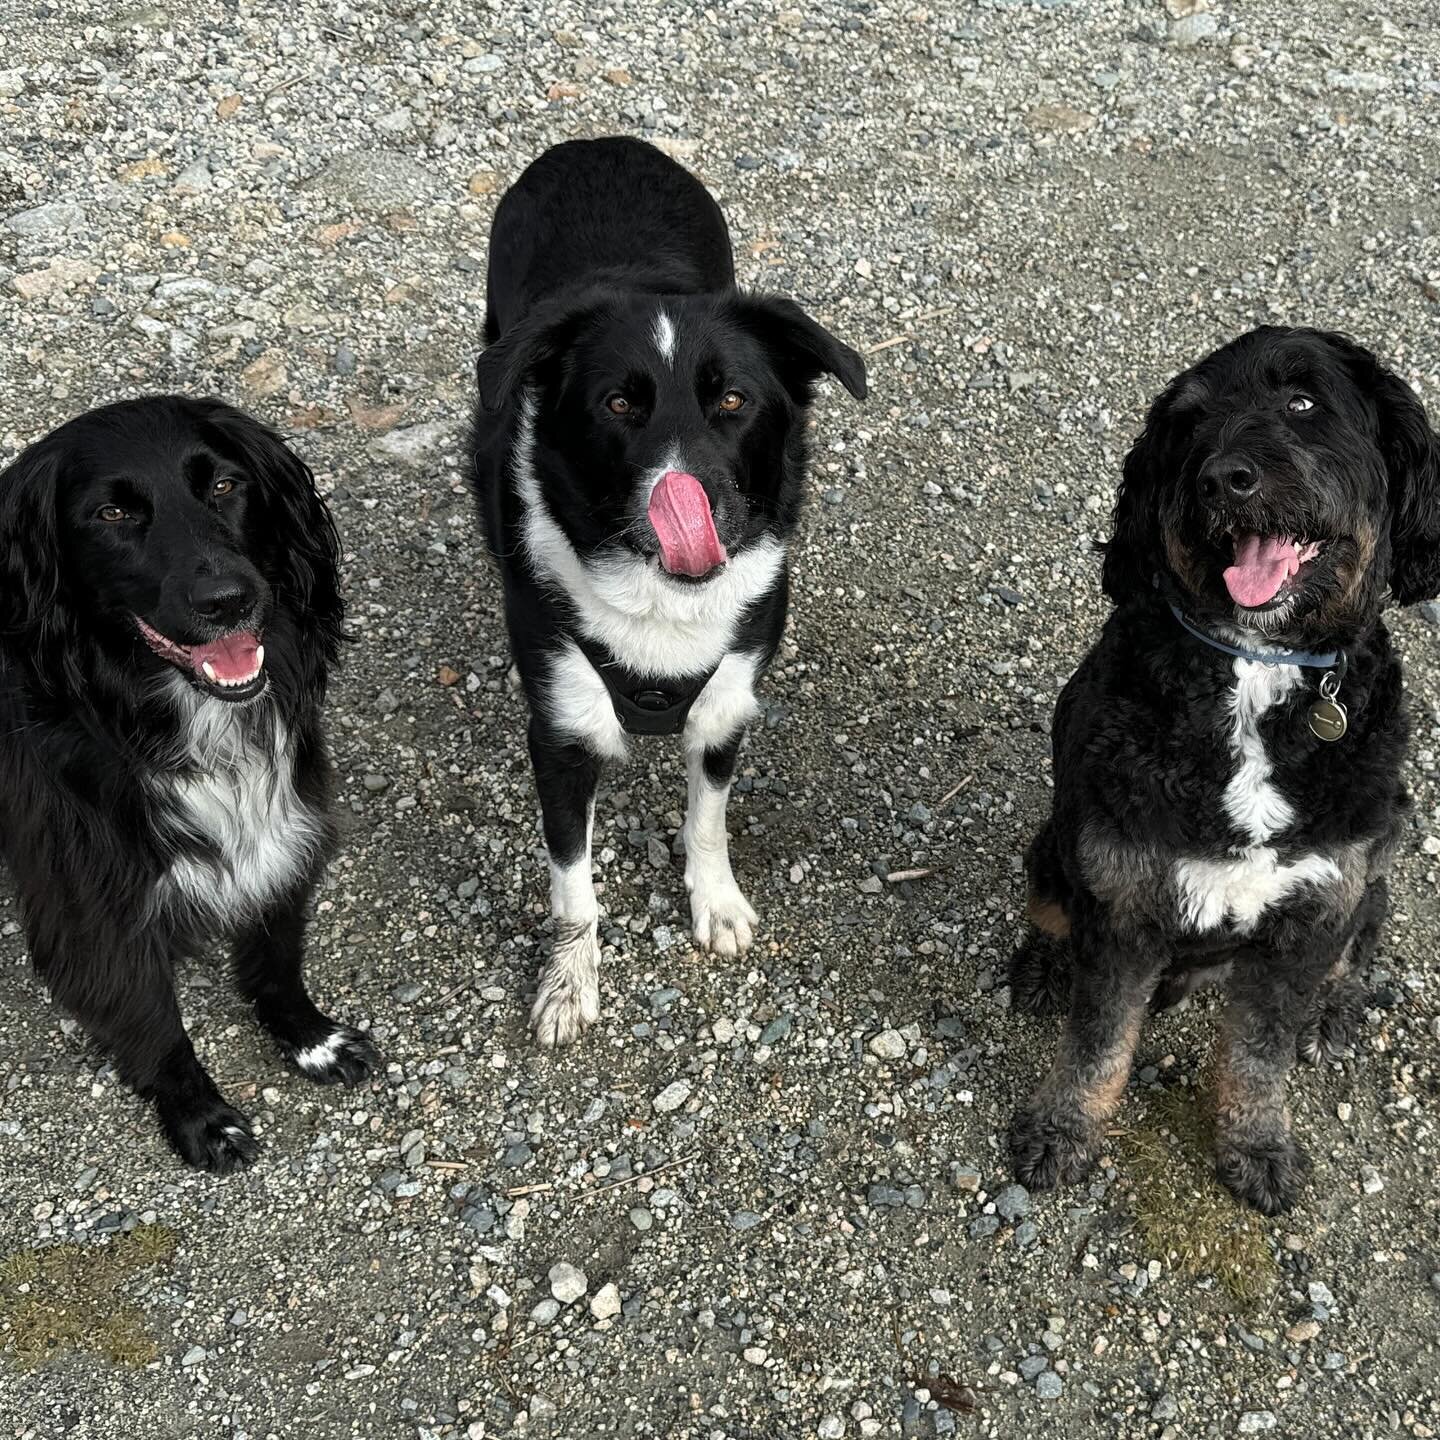 never a dull moment with this trio around&mdash;they always make me laugh🫶🏼🐶🐾
.
.
.
#dogsofinstagram #dog #dogs #vancouverdogwalker #dogsofvancouver #vancity #canada #dogwalker #petcare #pets #petsofinstagram #dogstagram #dogwalker #happydogs #no